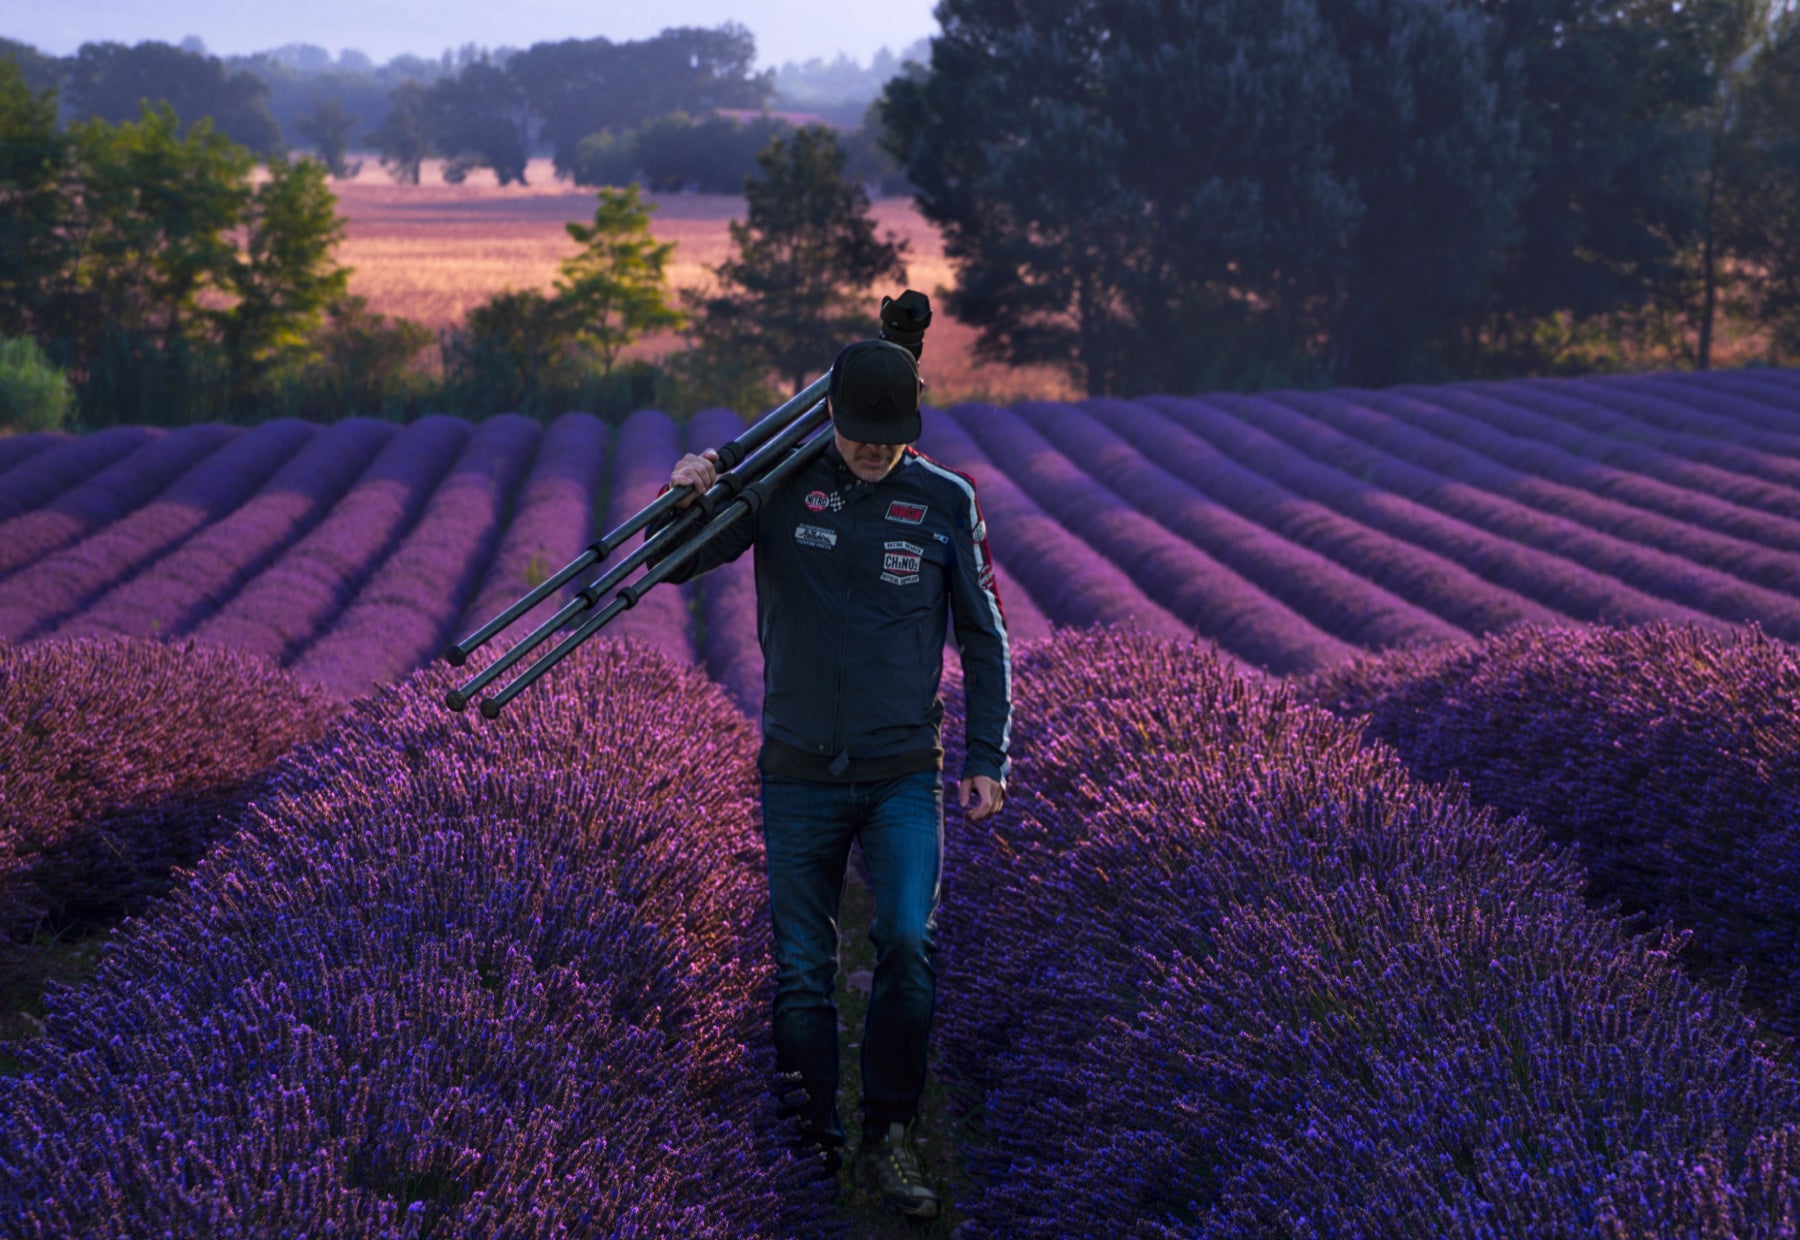 Portrait of Peter Lik in a baseball cap and leather motorcycle jacket walking with a tripod through the lavender fields of Valensole, France.